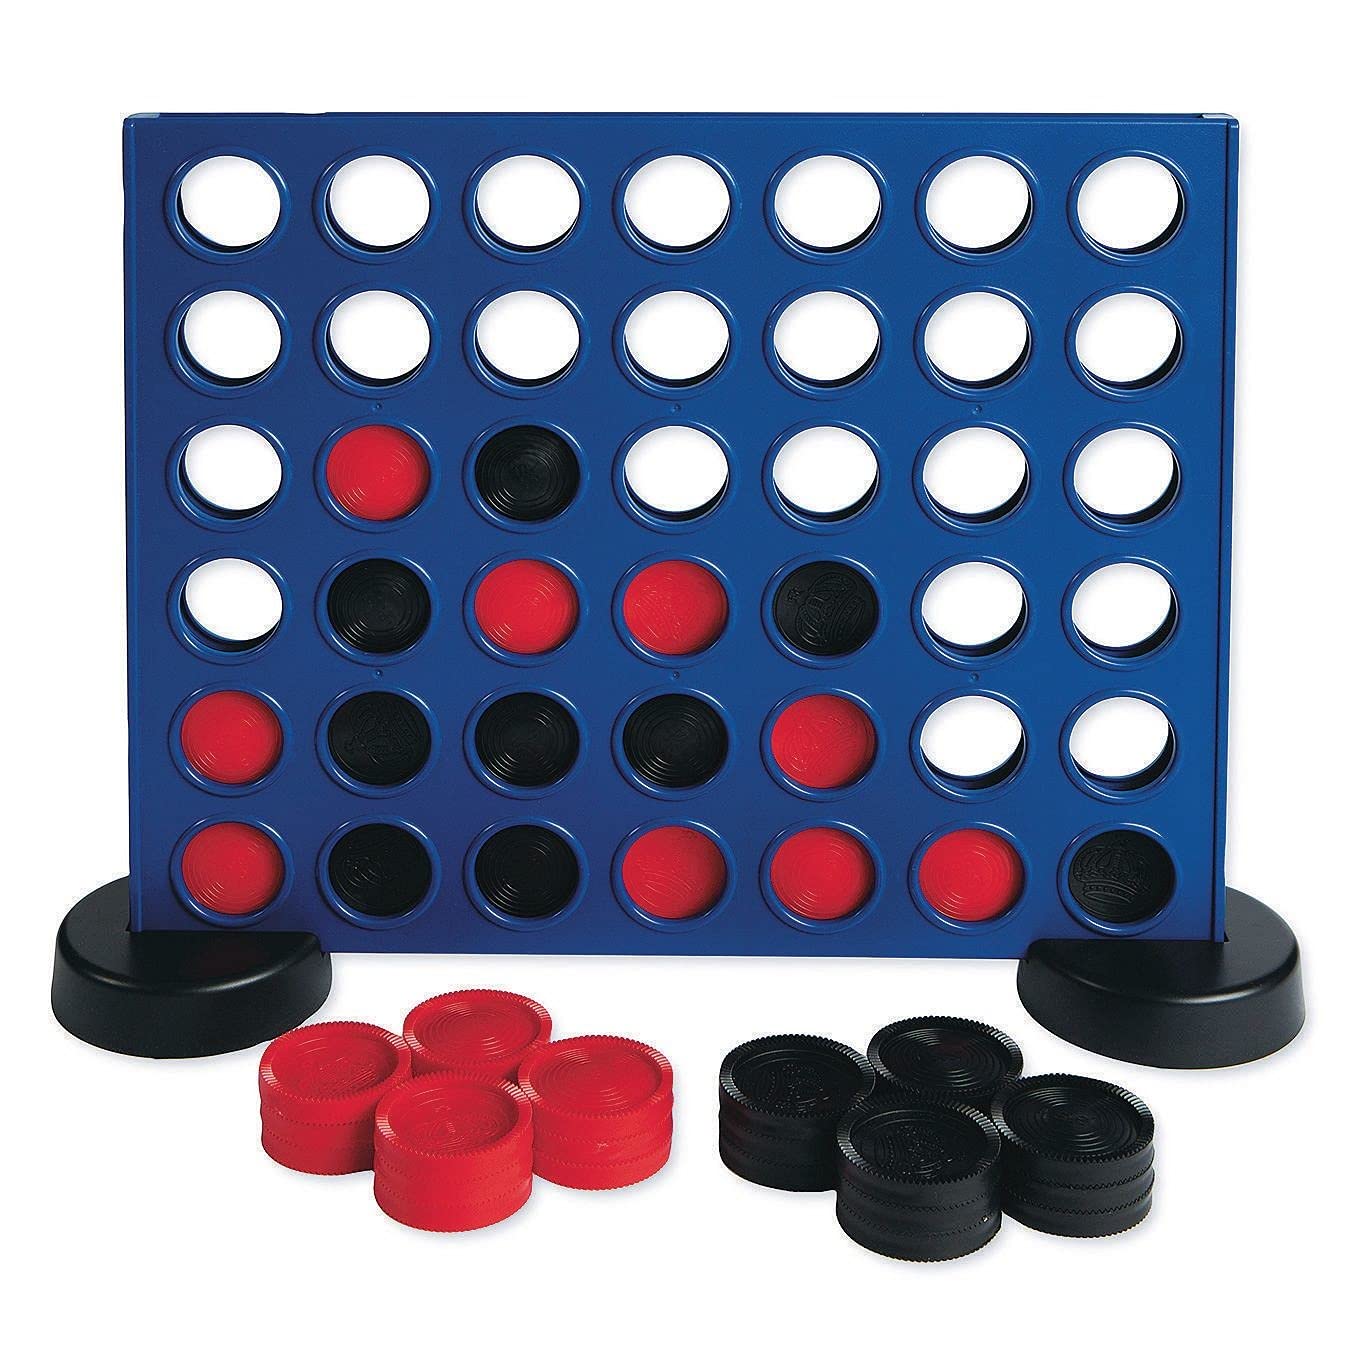 S&S Worldwide Giant 2-in-1 Four in a Row & Checkers Game